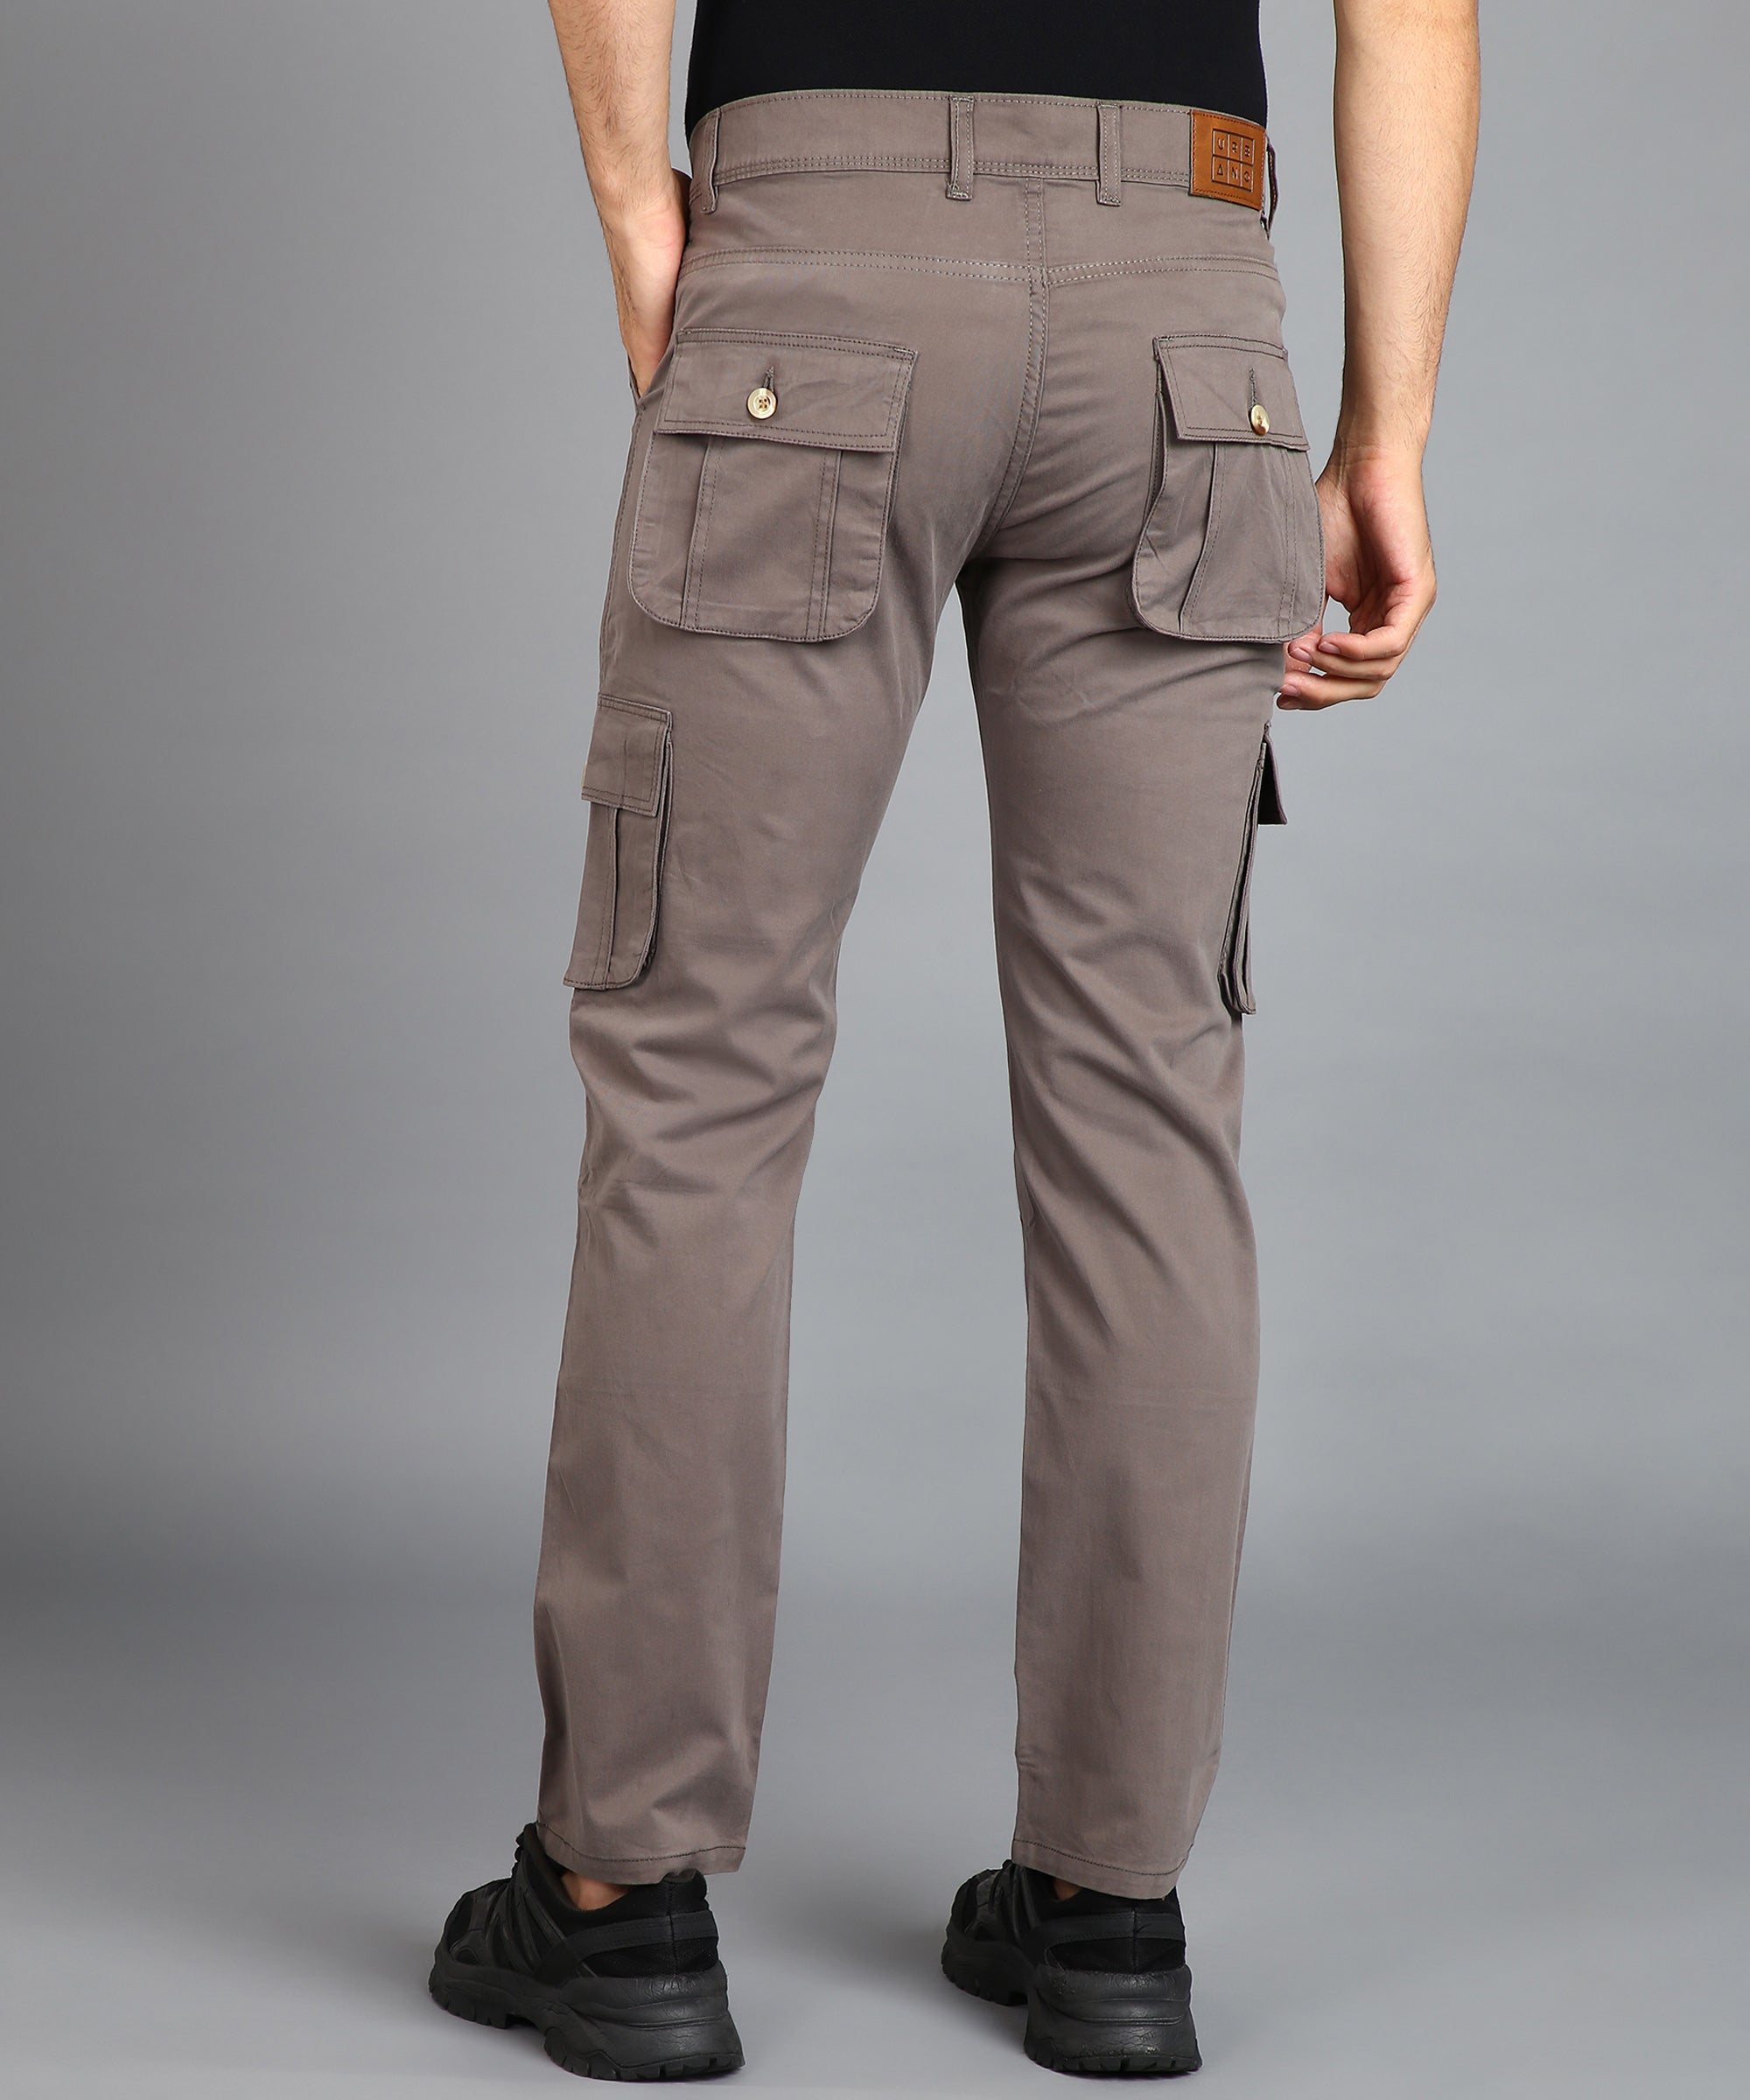 Men's Dark Grey Regular Fit Solid Cargo Chino Pant with 6 Pockets